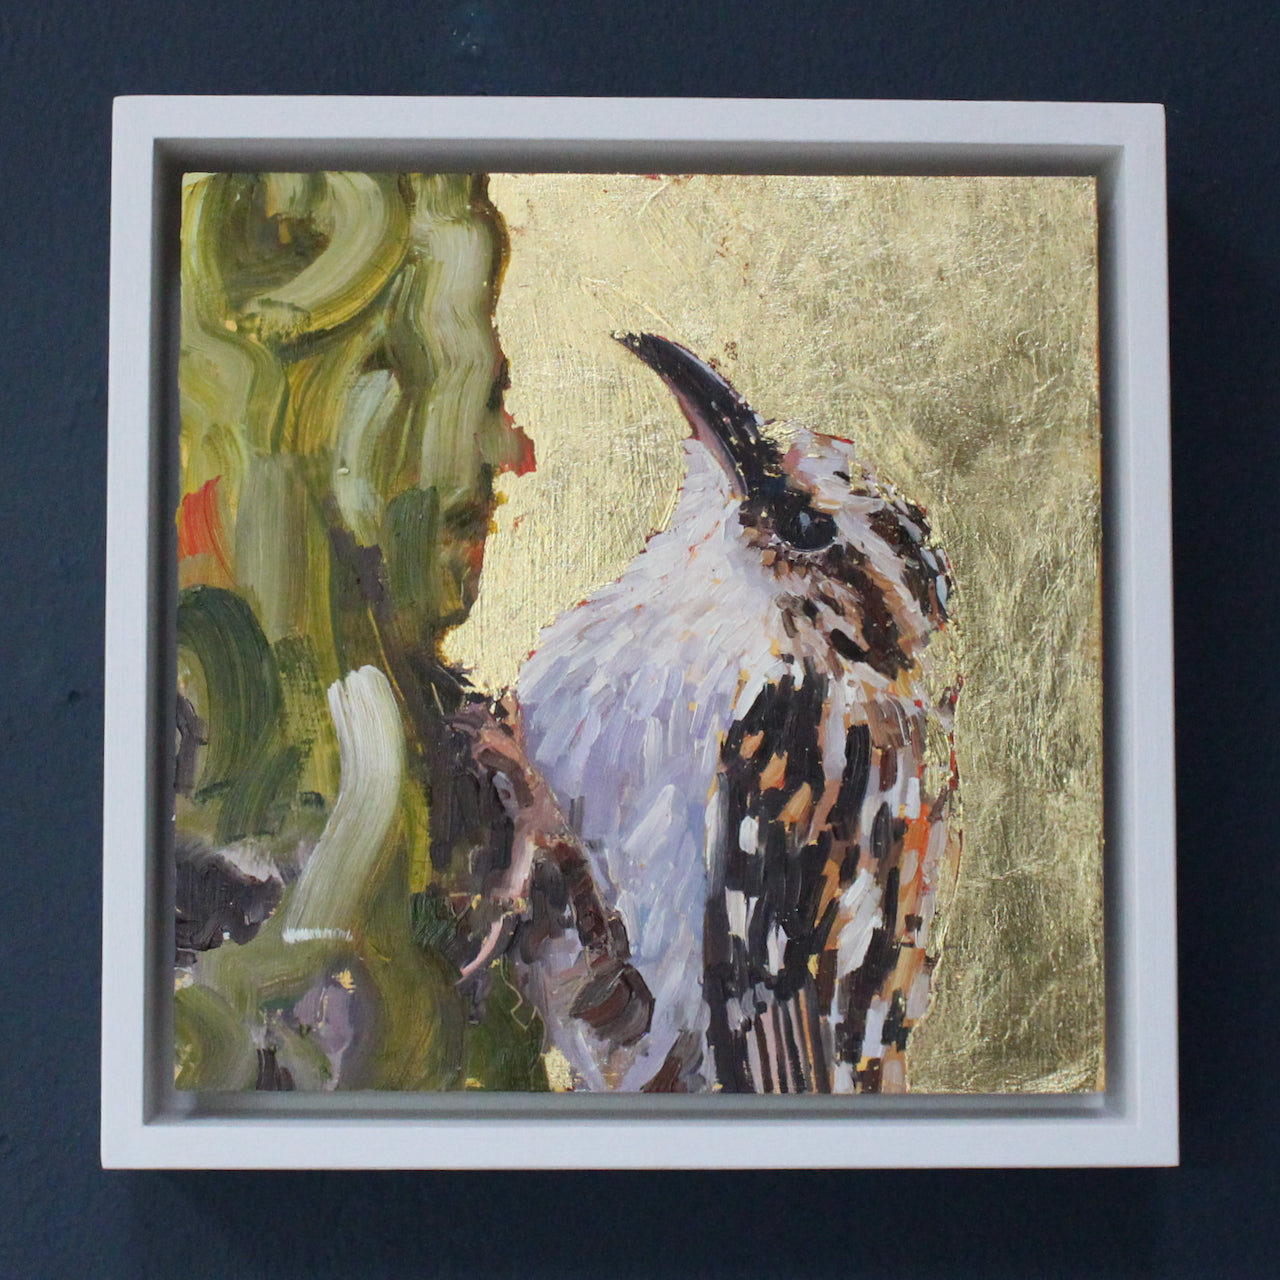 a Jill Hudson painting of a tree creeper bird with white plumage, brown beak on a gold background.